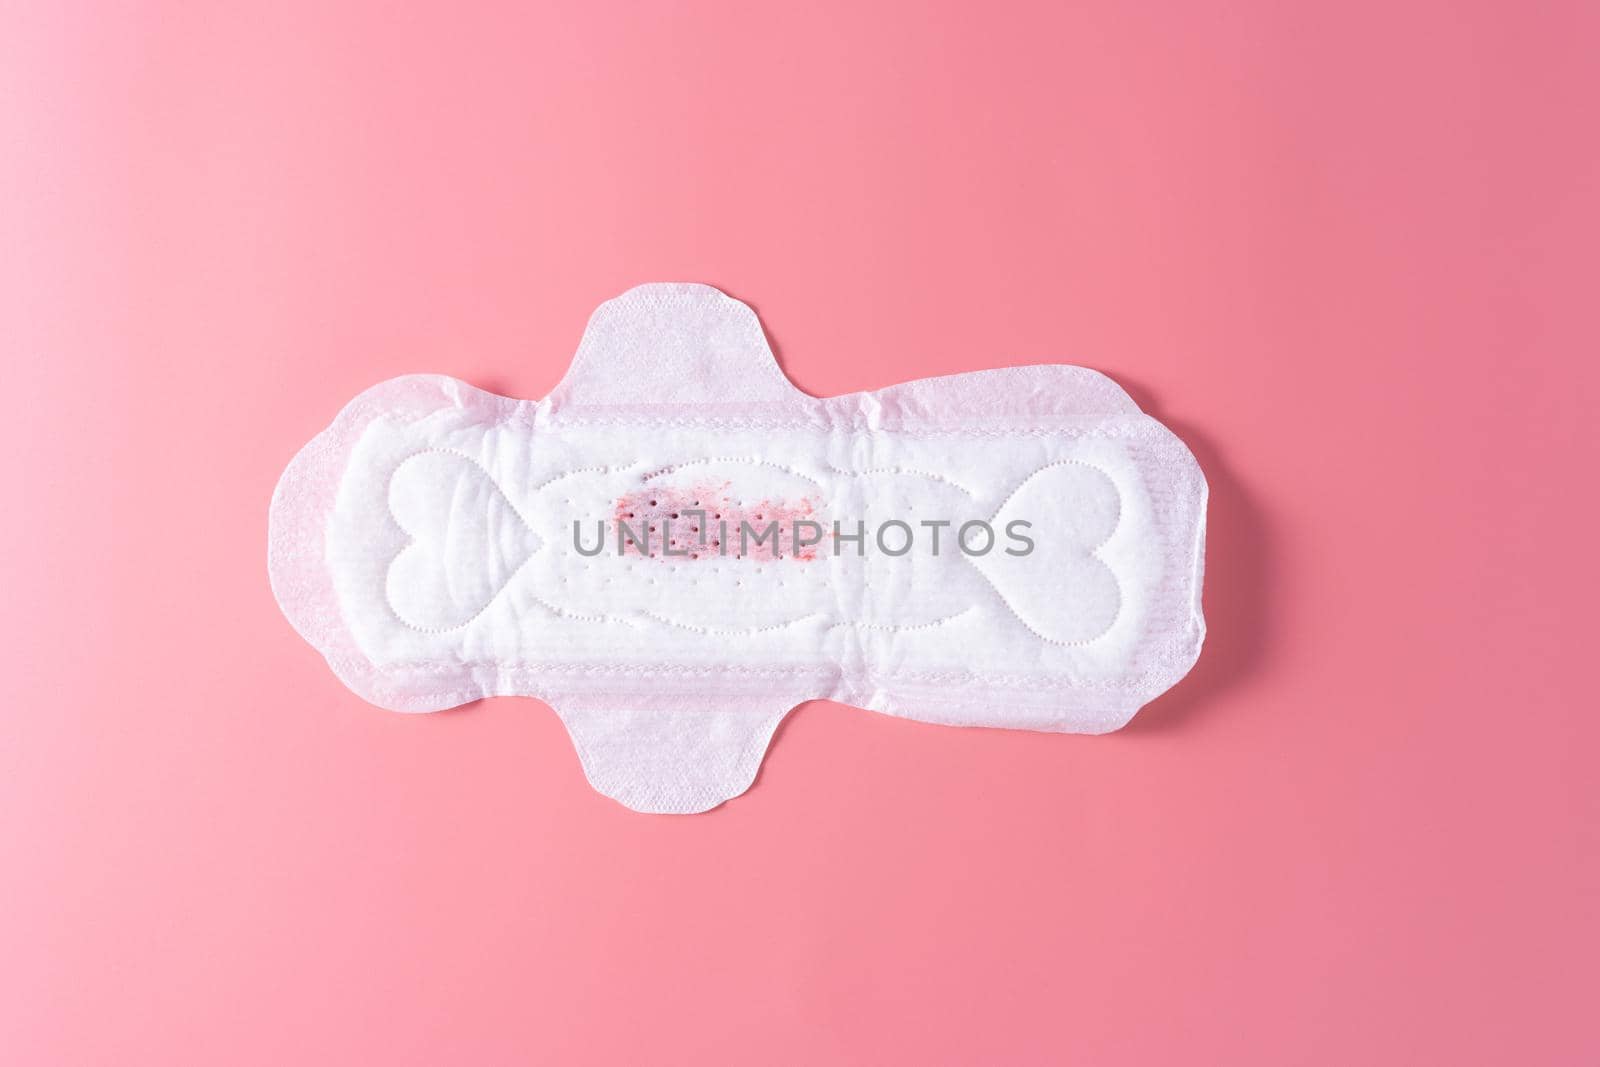 Used Sanitary pad with little amount of blood, Sanitary napkin on pink background. Menstruation, Feminine hygiene, top view.